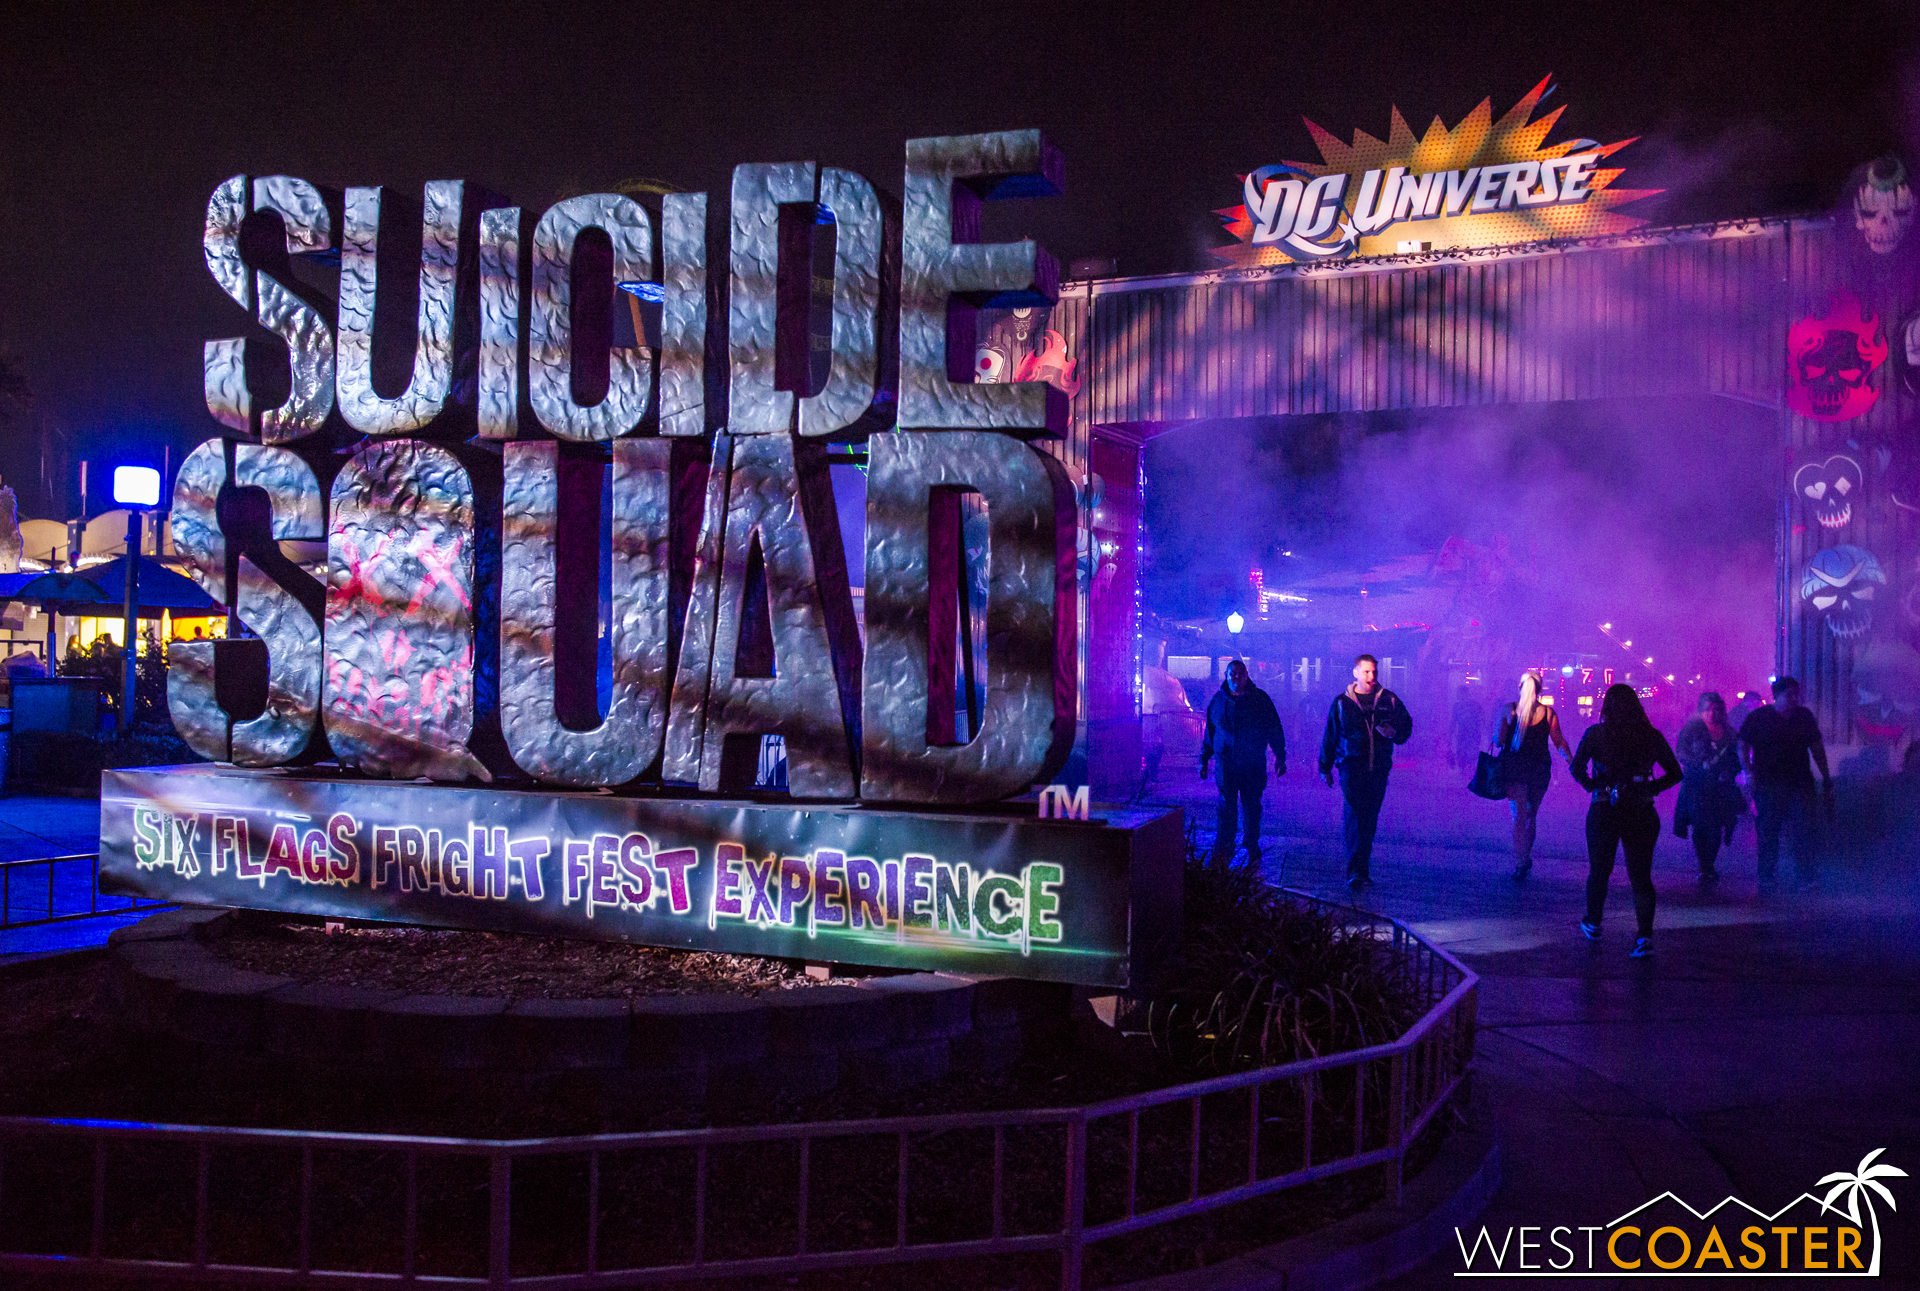  The Suicide Squad Experience is back at Fright Fest this year. 